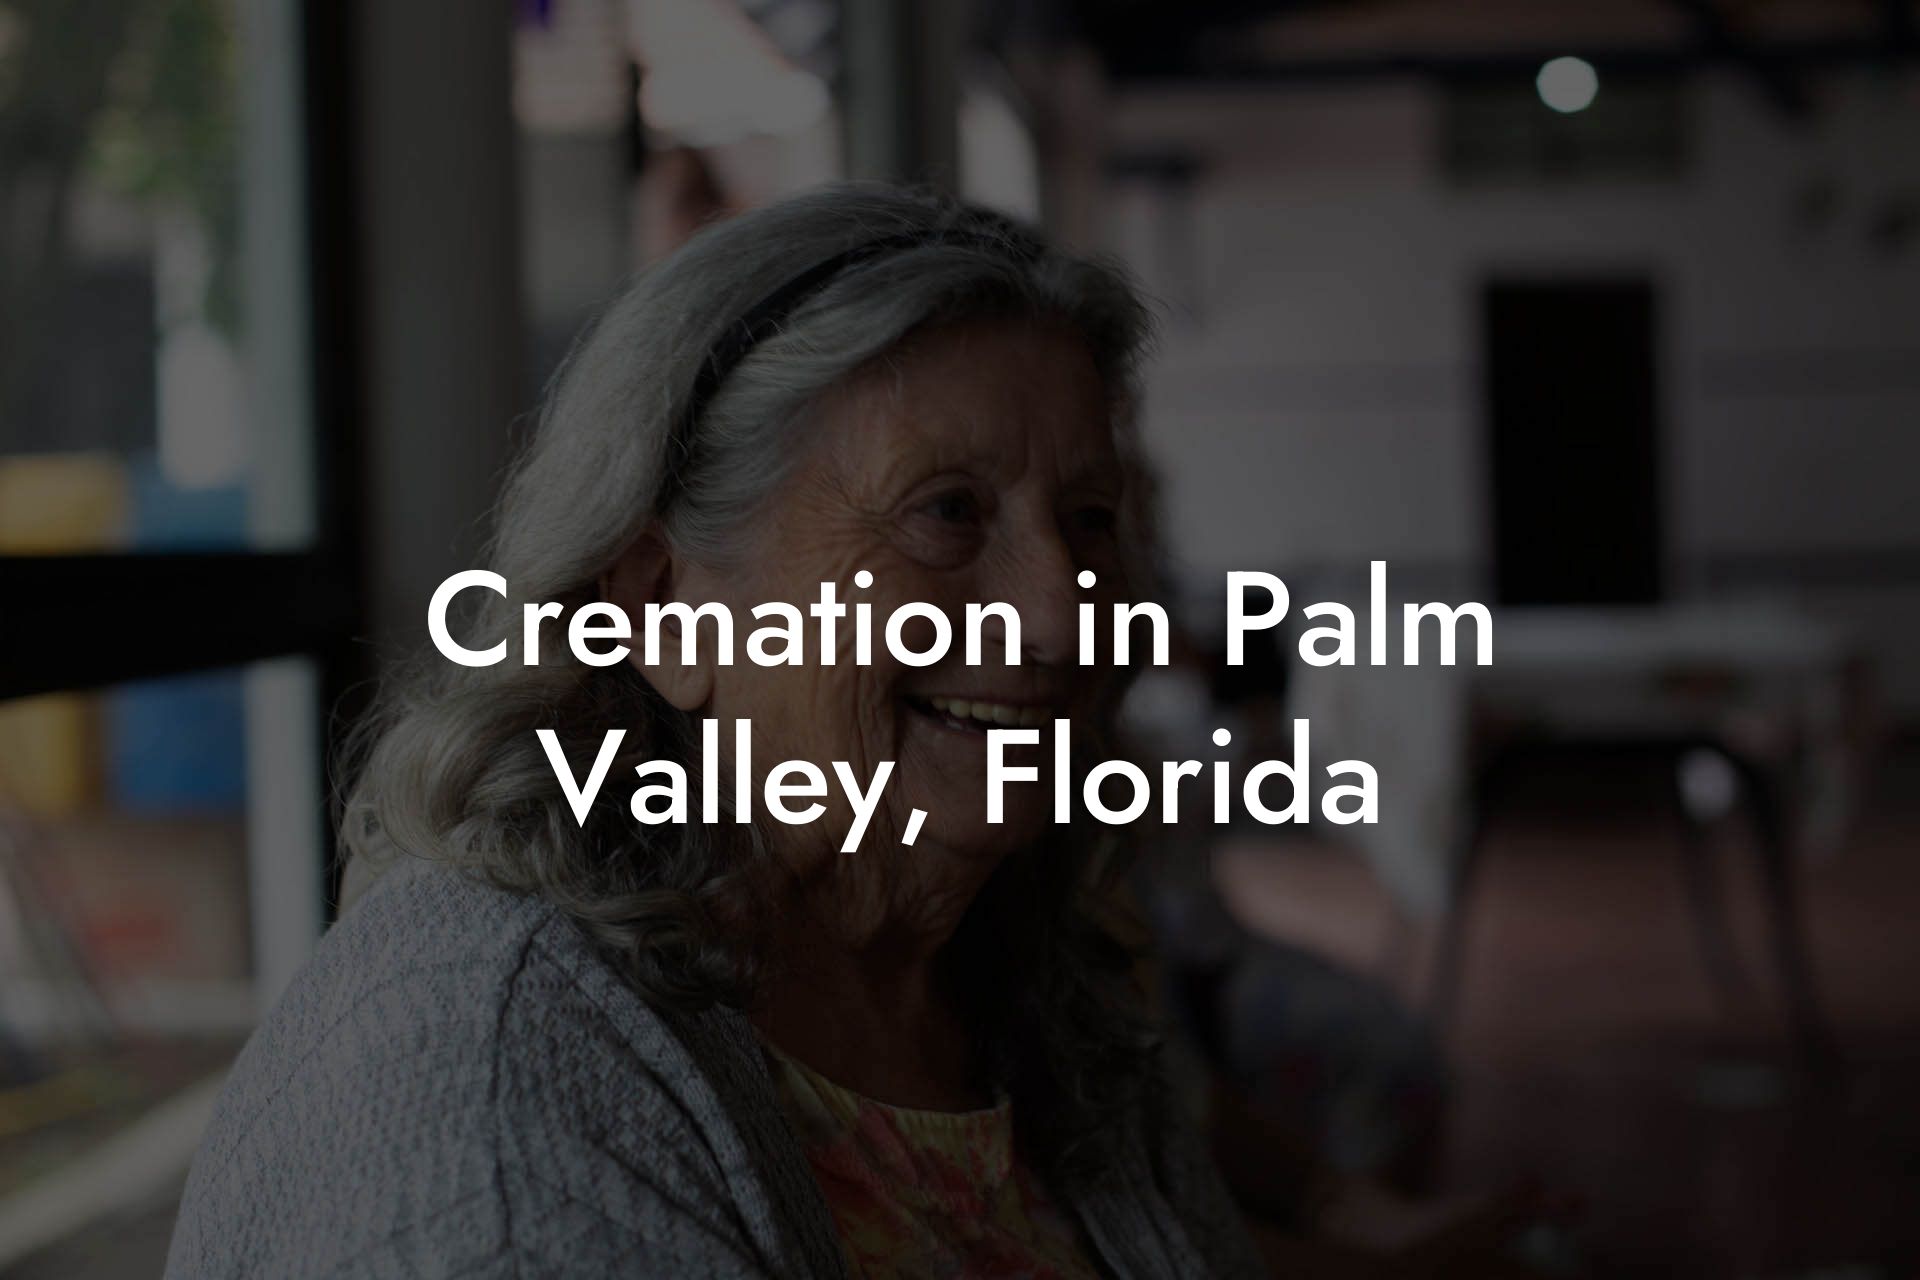 Cremation in Palm Valley, Florida